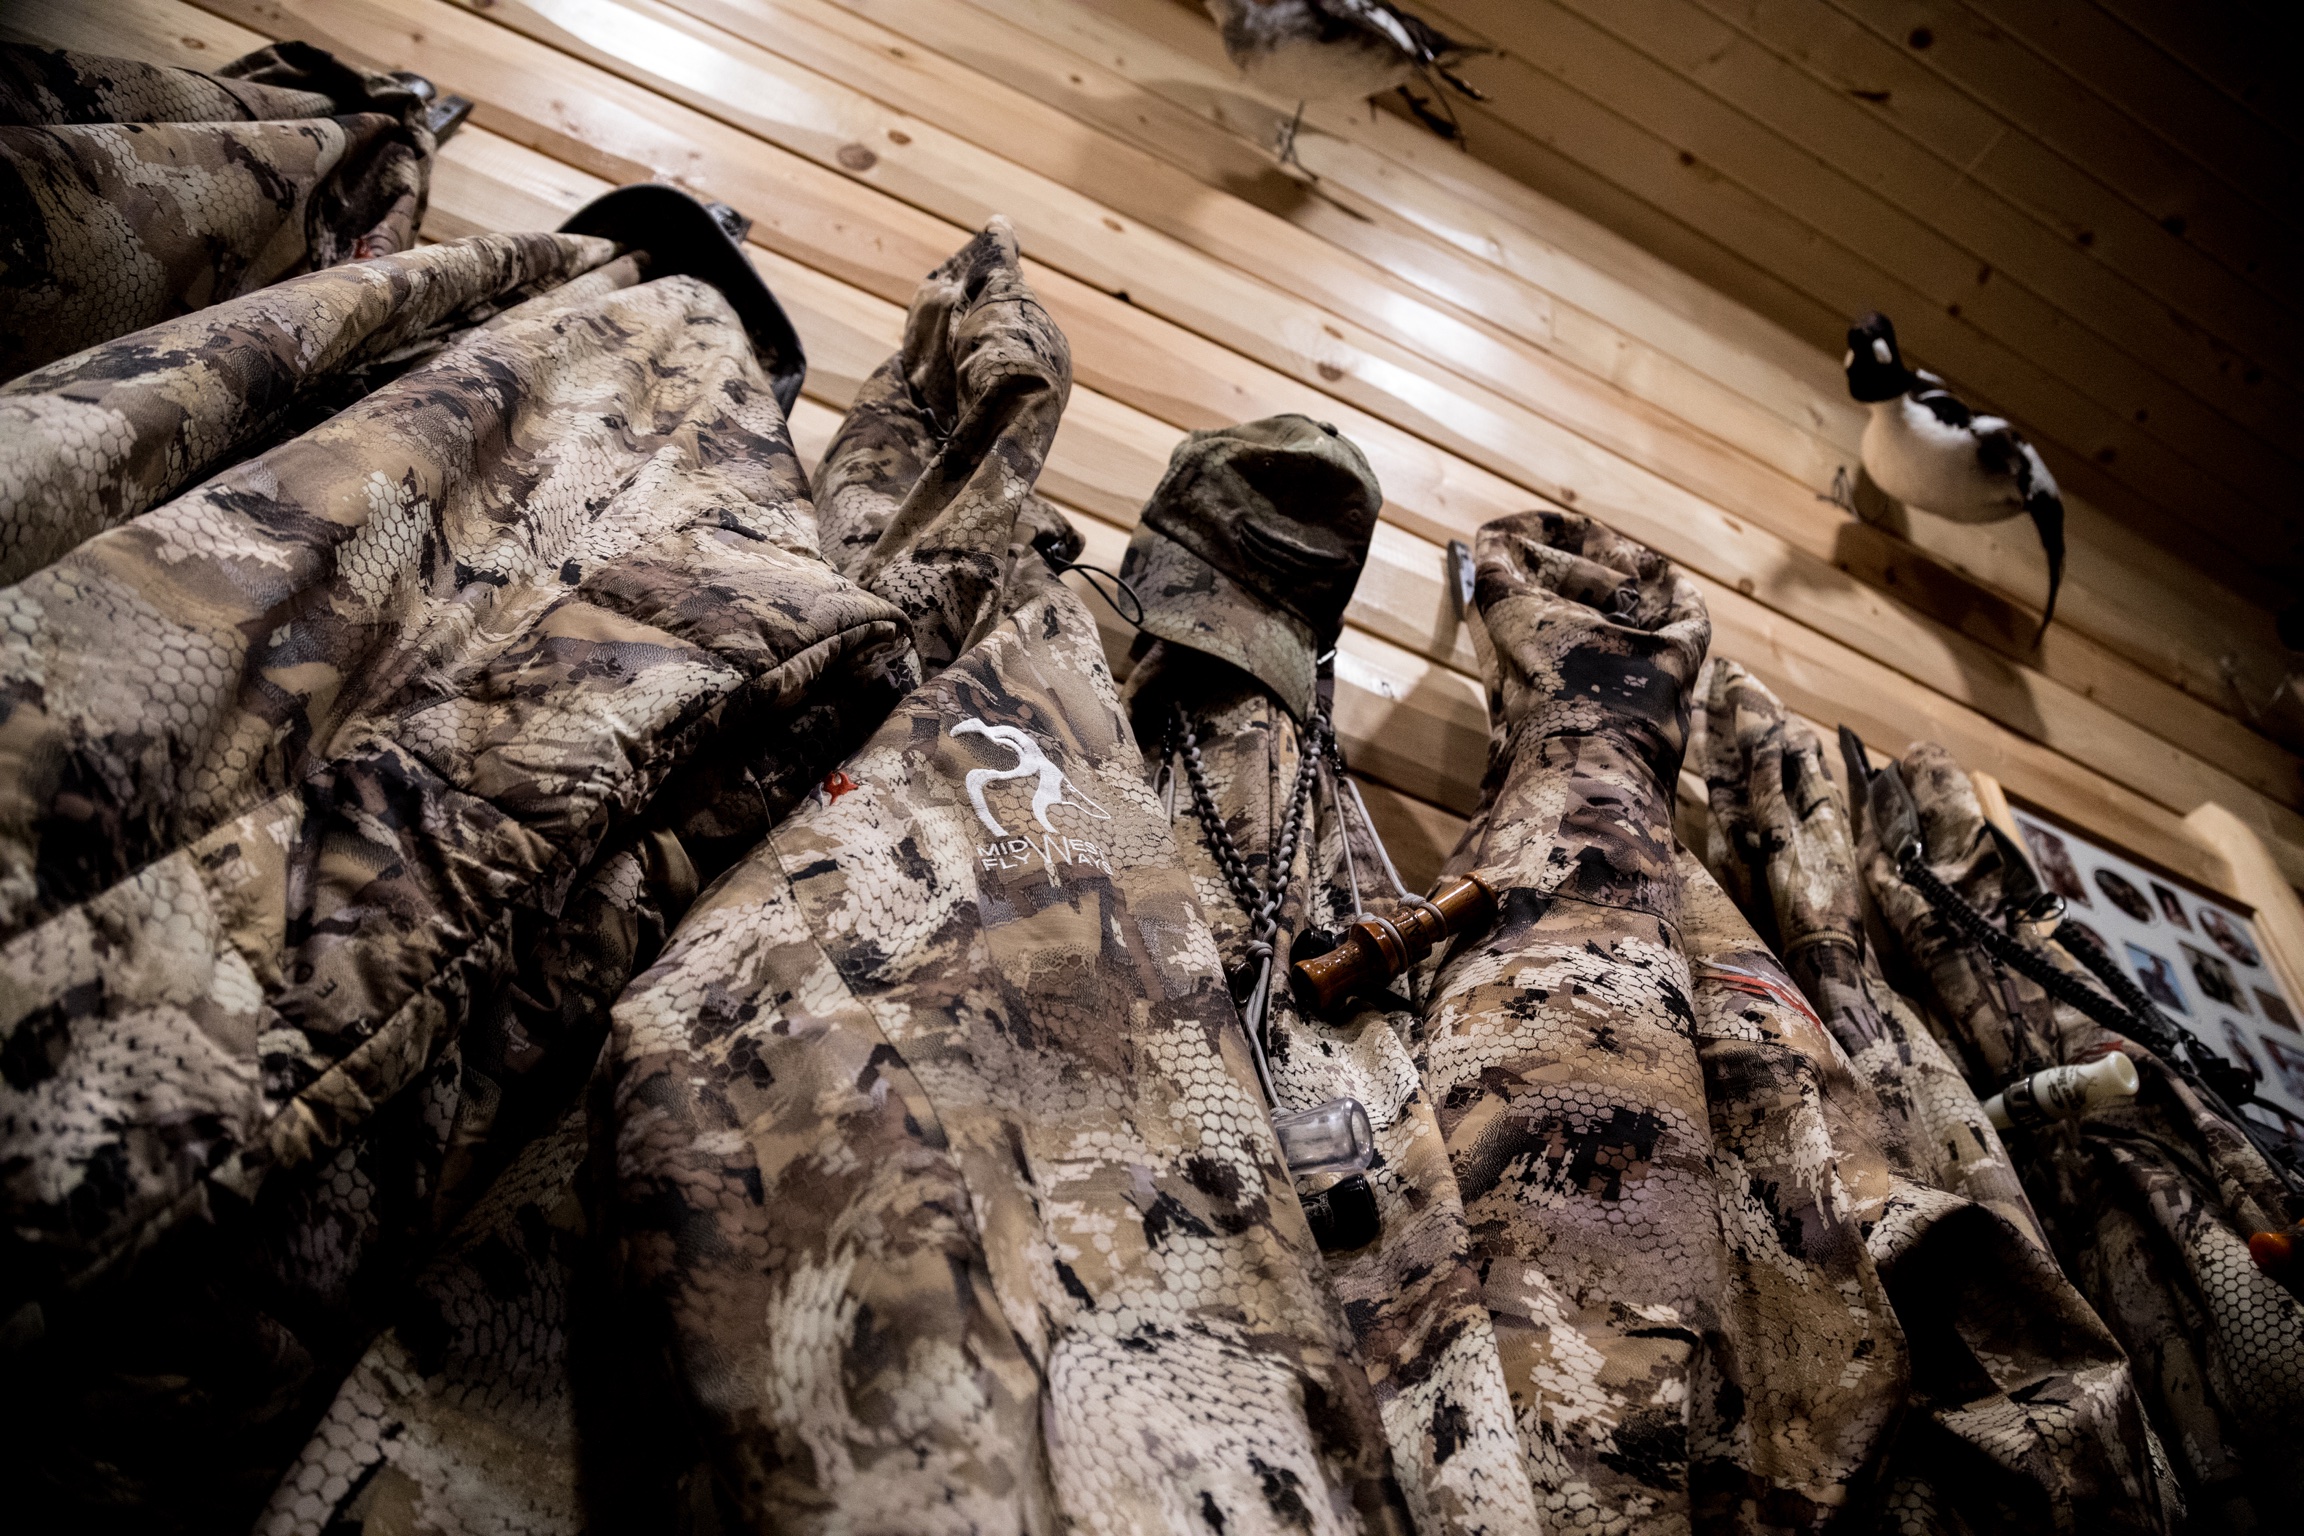 What Duck Hunting Gear You Need to Get Started